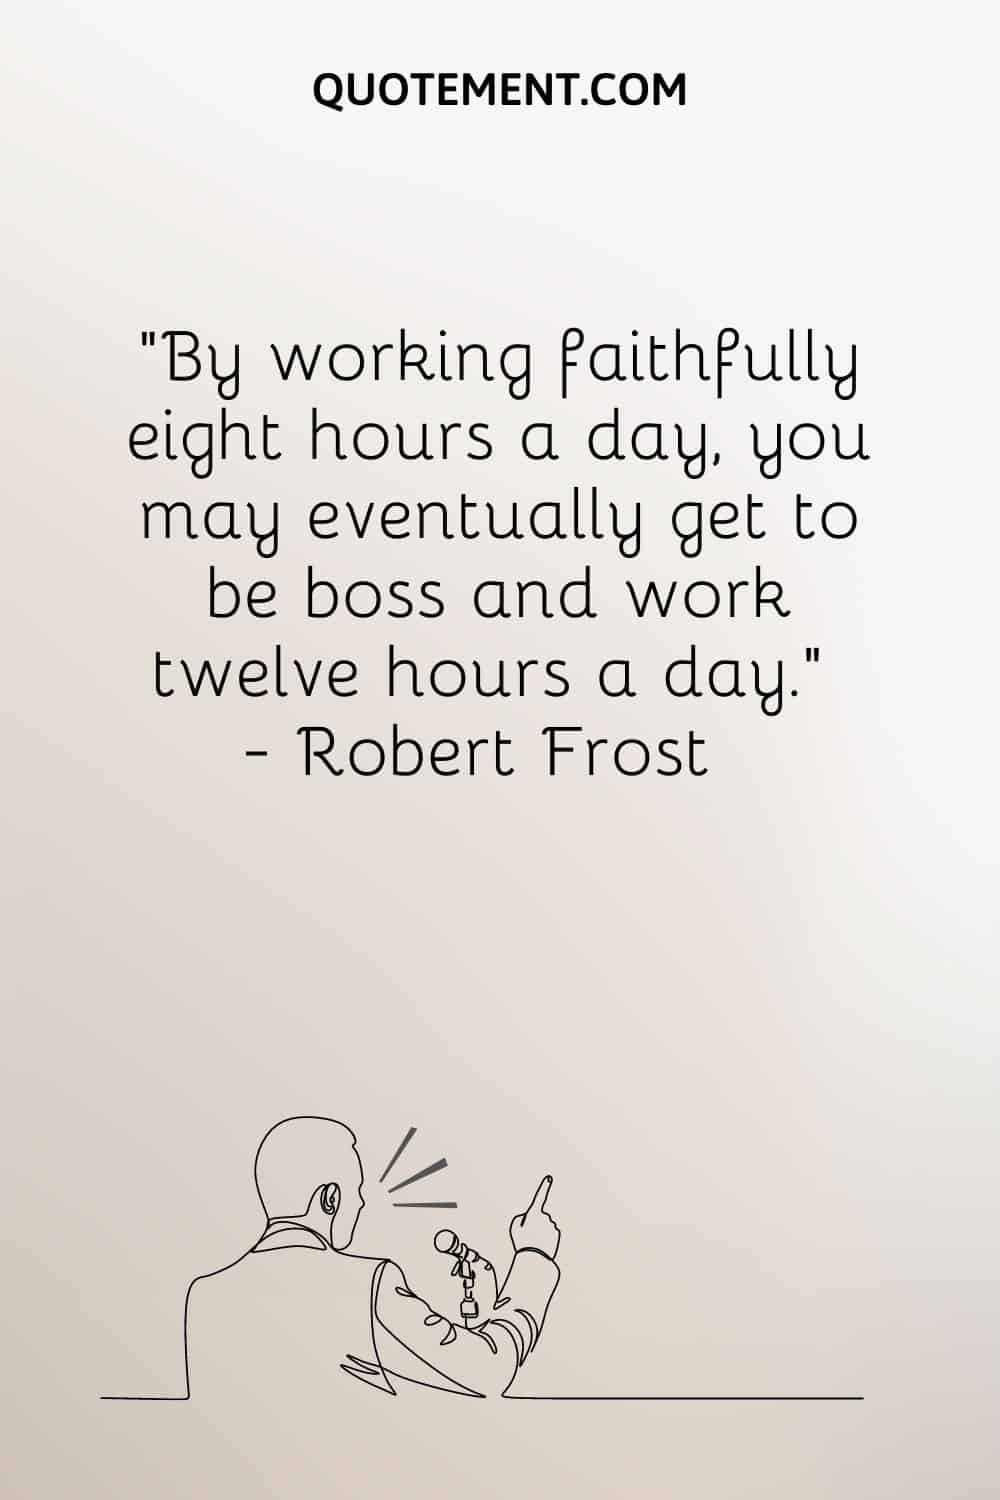 By working faithfully eight hours a day, you may eventually get to be boss and work twelve hours a day